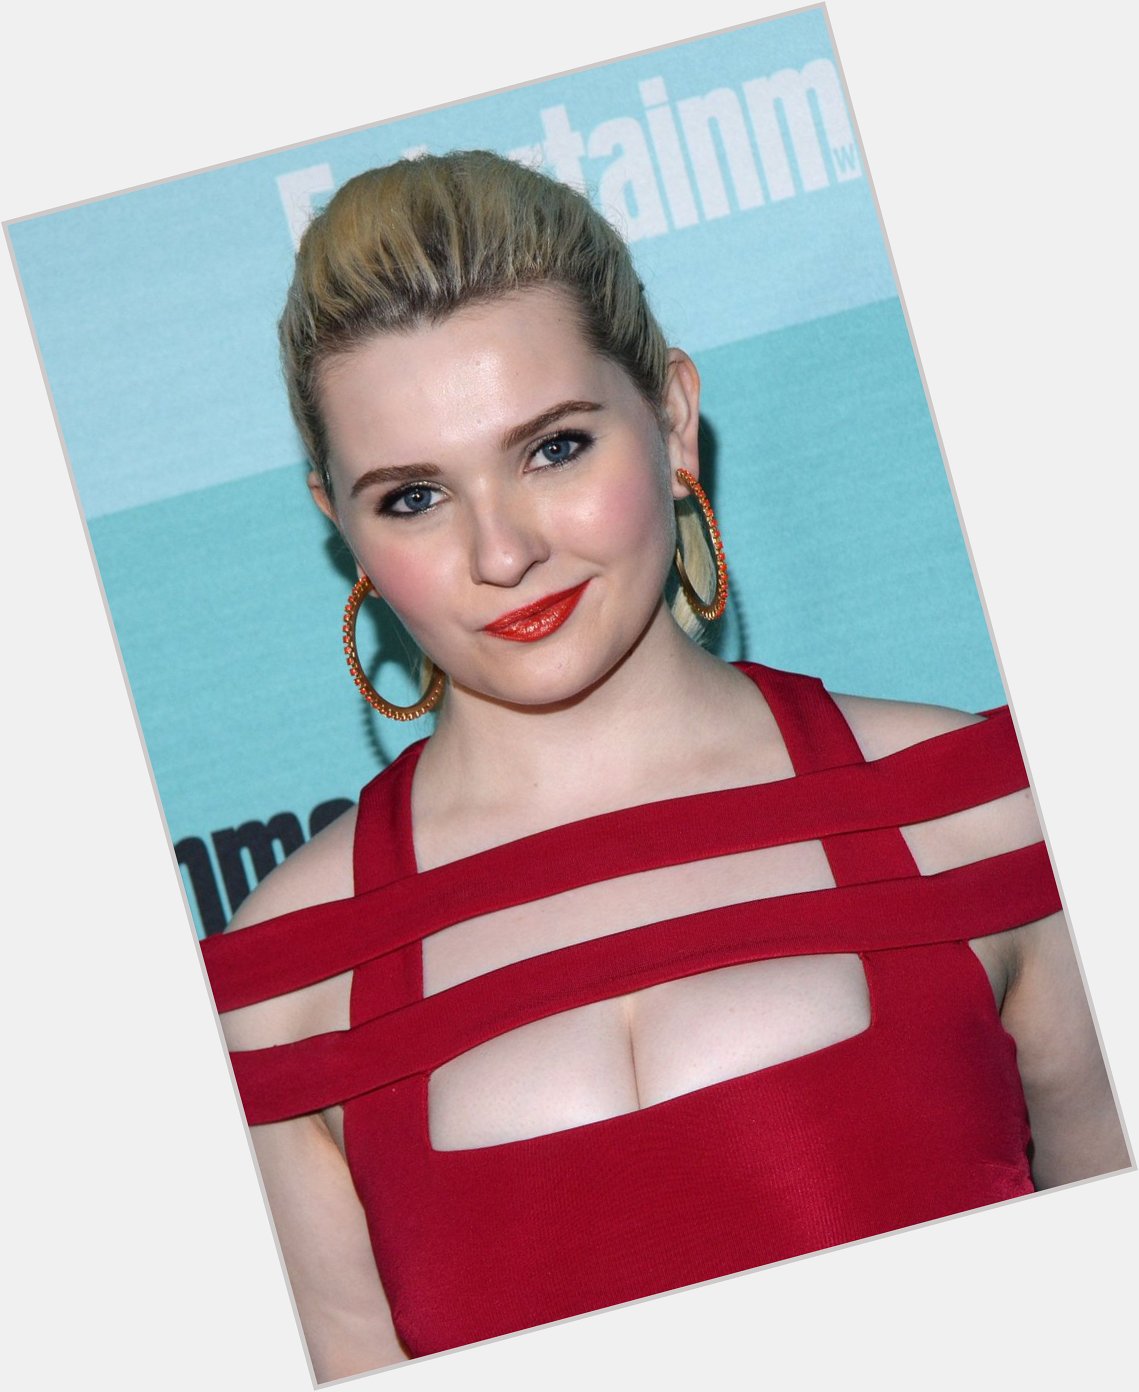 Happy birthday to the underrated Abigail Breslin! 